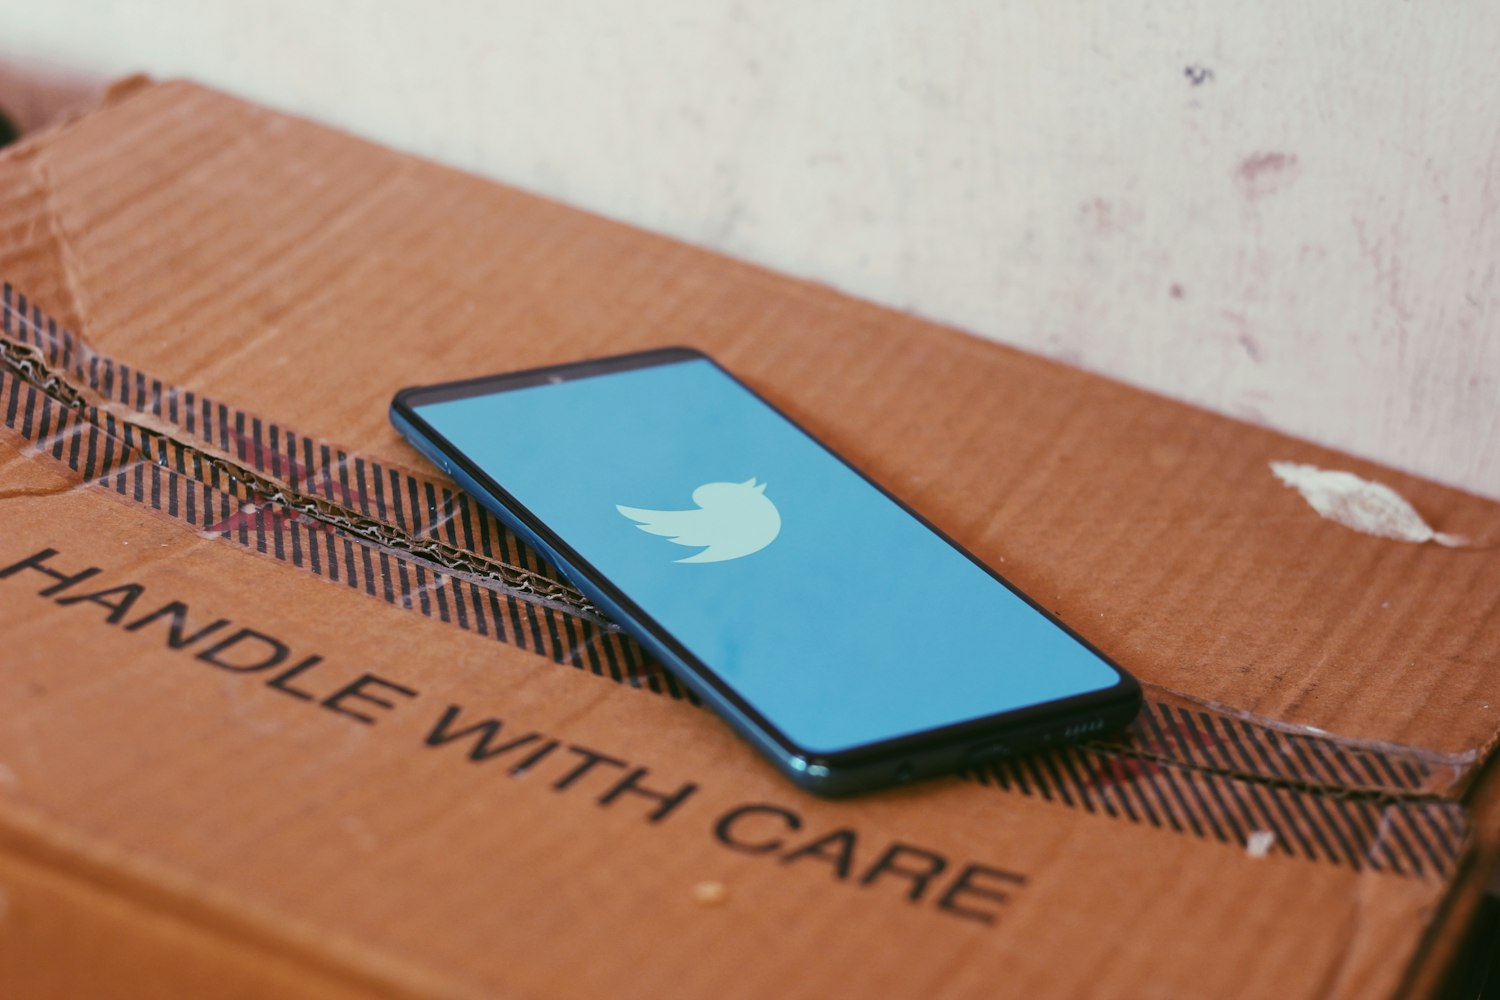 Phone showing Twitter label on a box saying 'Handle with Care'